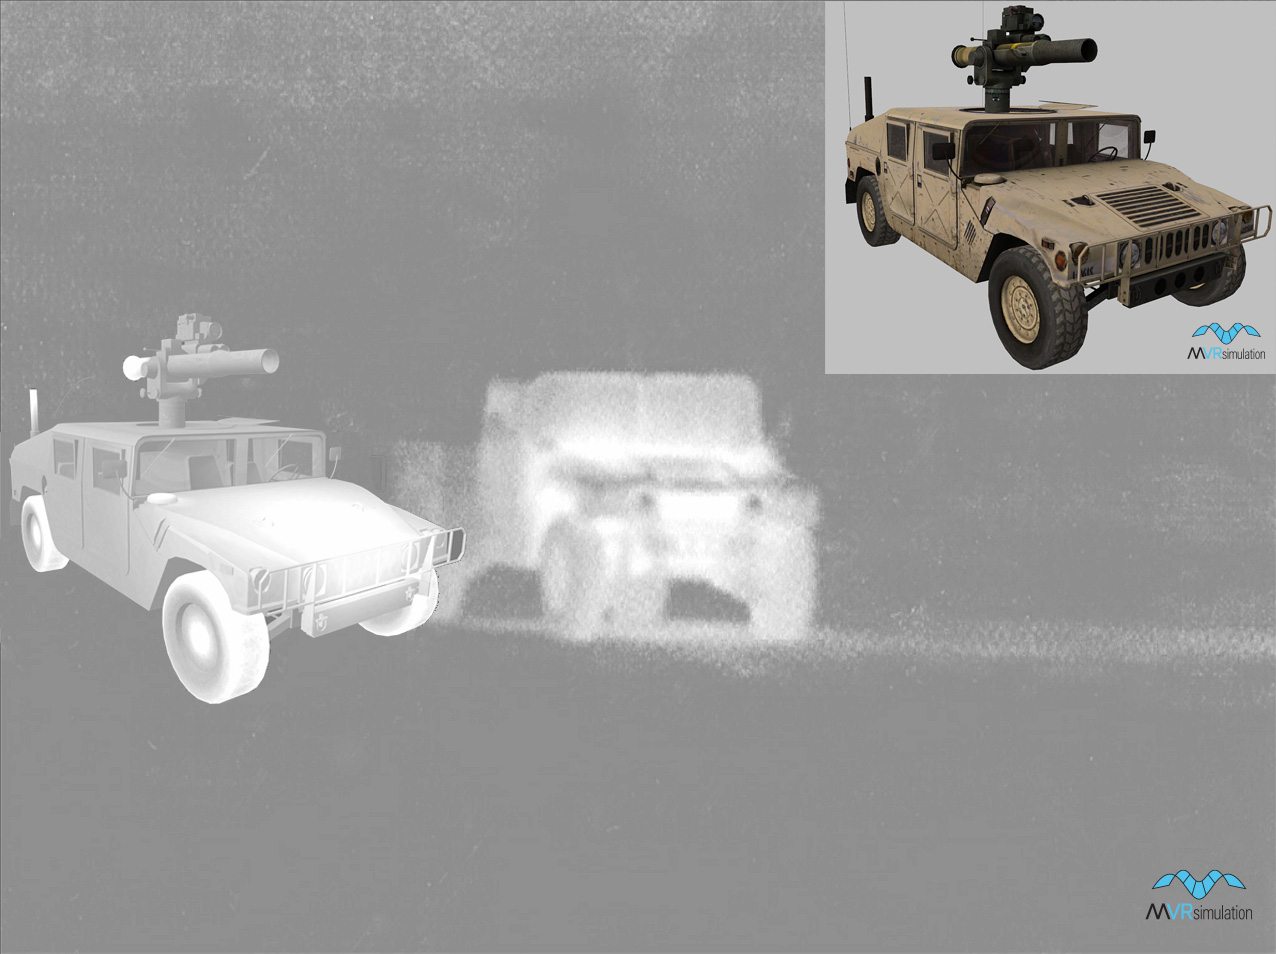 Simulated infra-red (IR) view of a Humvee model from MVRsimulation's 3D military vehicle library (on the left) next to an infra-red photo of an actual military vehicle. The photo of the real vehicle is taken from PEO-STRI's poster of the Recognition of Combat Vehicles (ROC-V) thermal siting training program, which has been displayed at trade shows. The photo is used here as a background image in MVRsimulation's Model Viewer. In the upper-right is the textured view of the Humvee model.